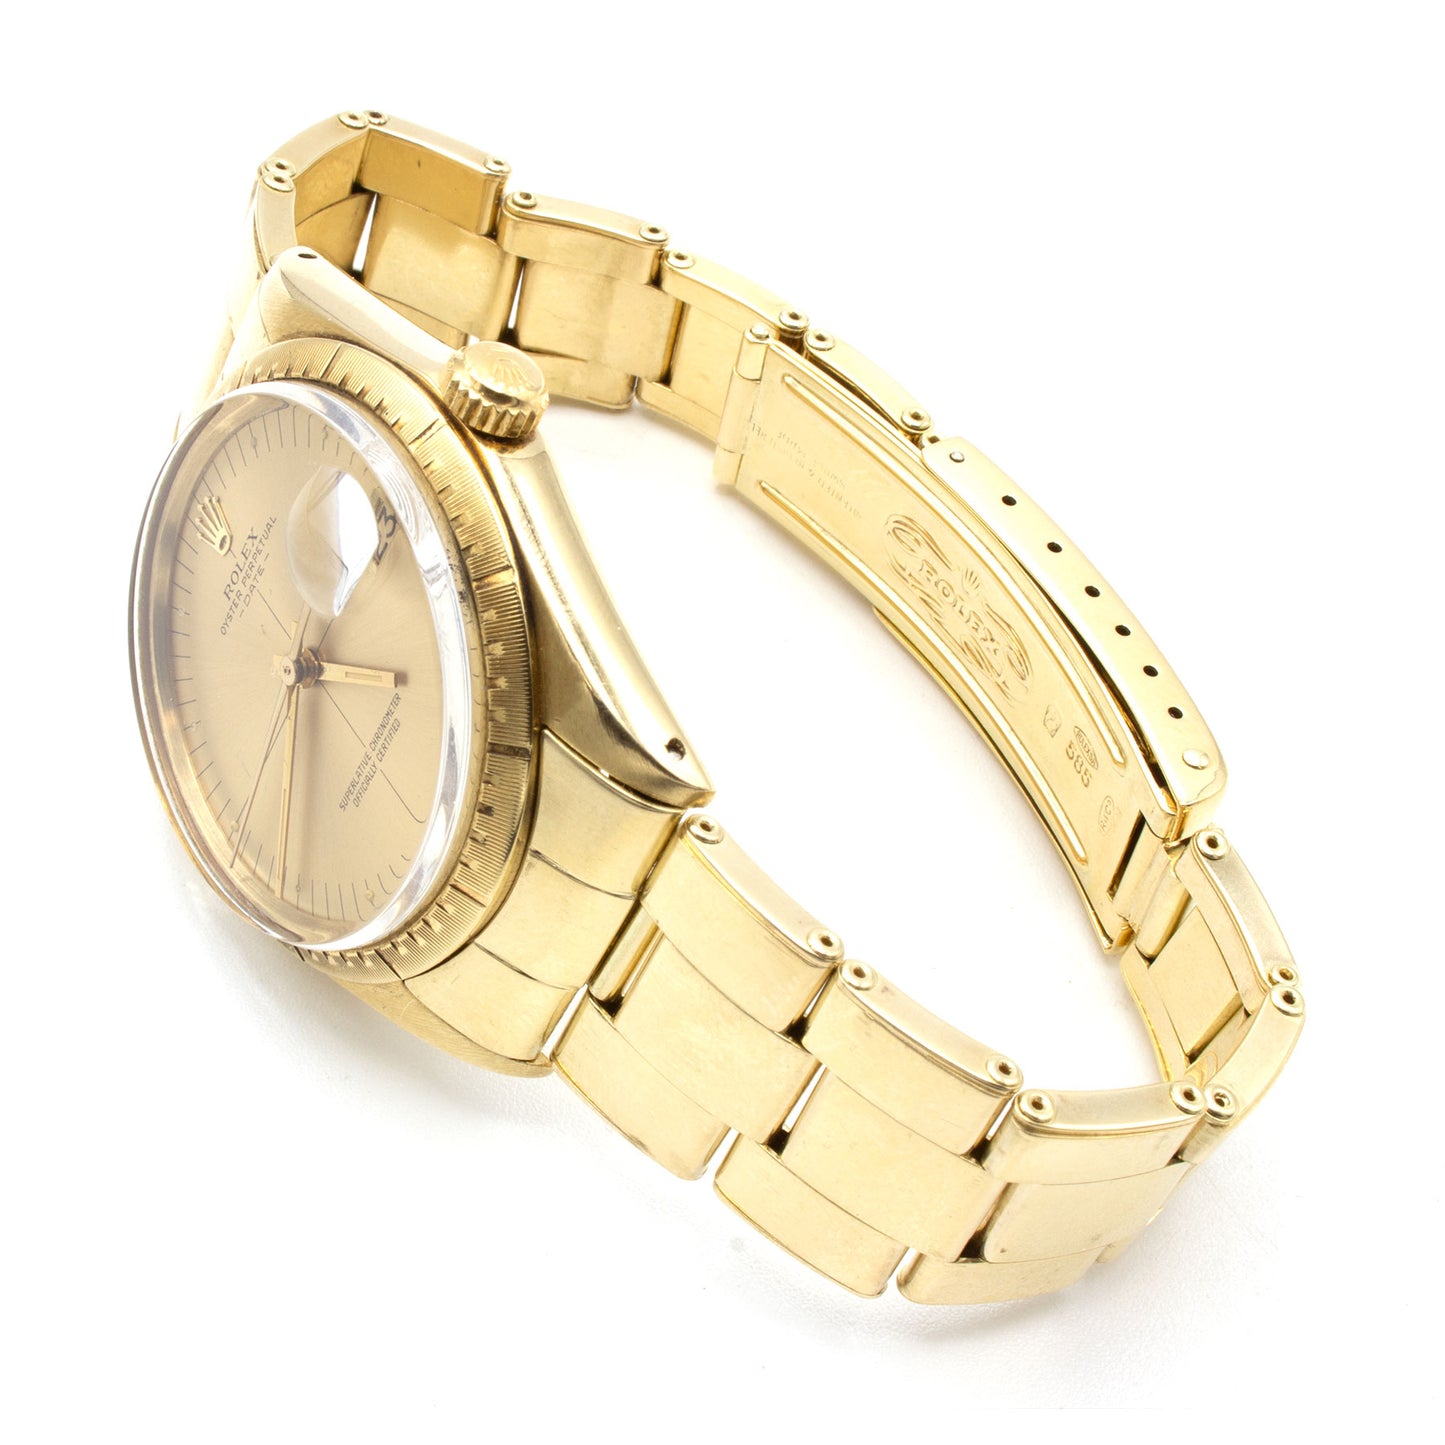 Rolex Oyster Perpetual 14K 1503 watch